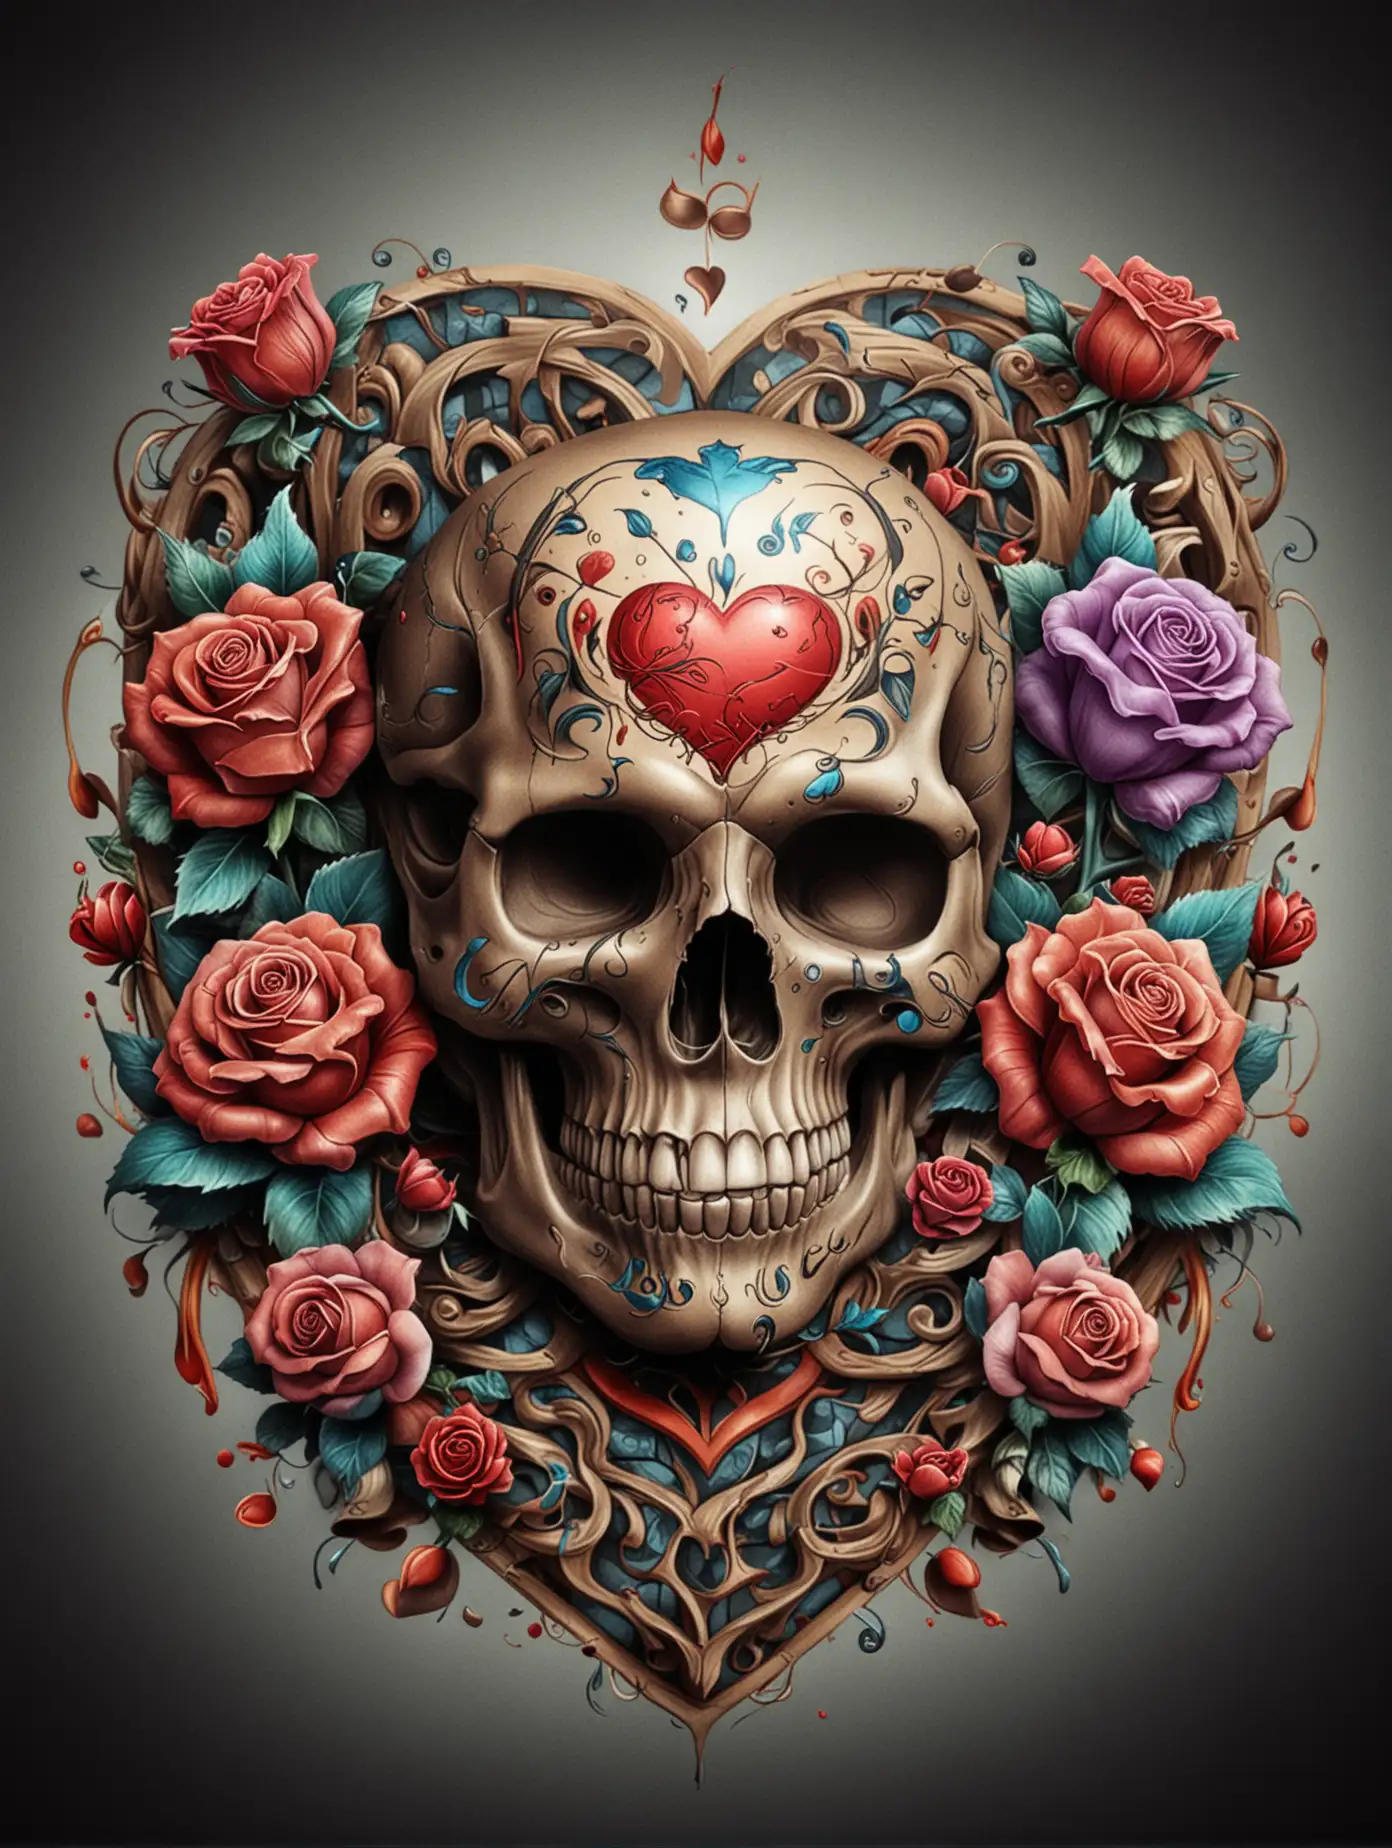 Colorful 3D Oldschool Tattoo Design with Skull Heart and Roses